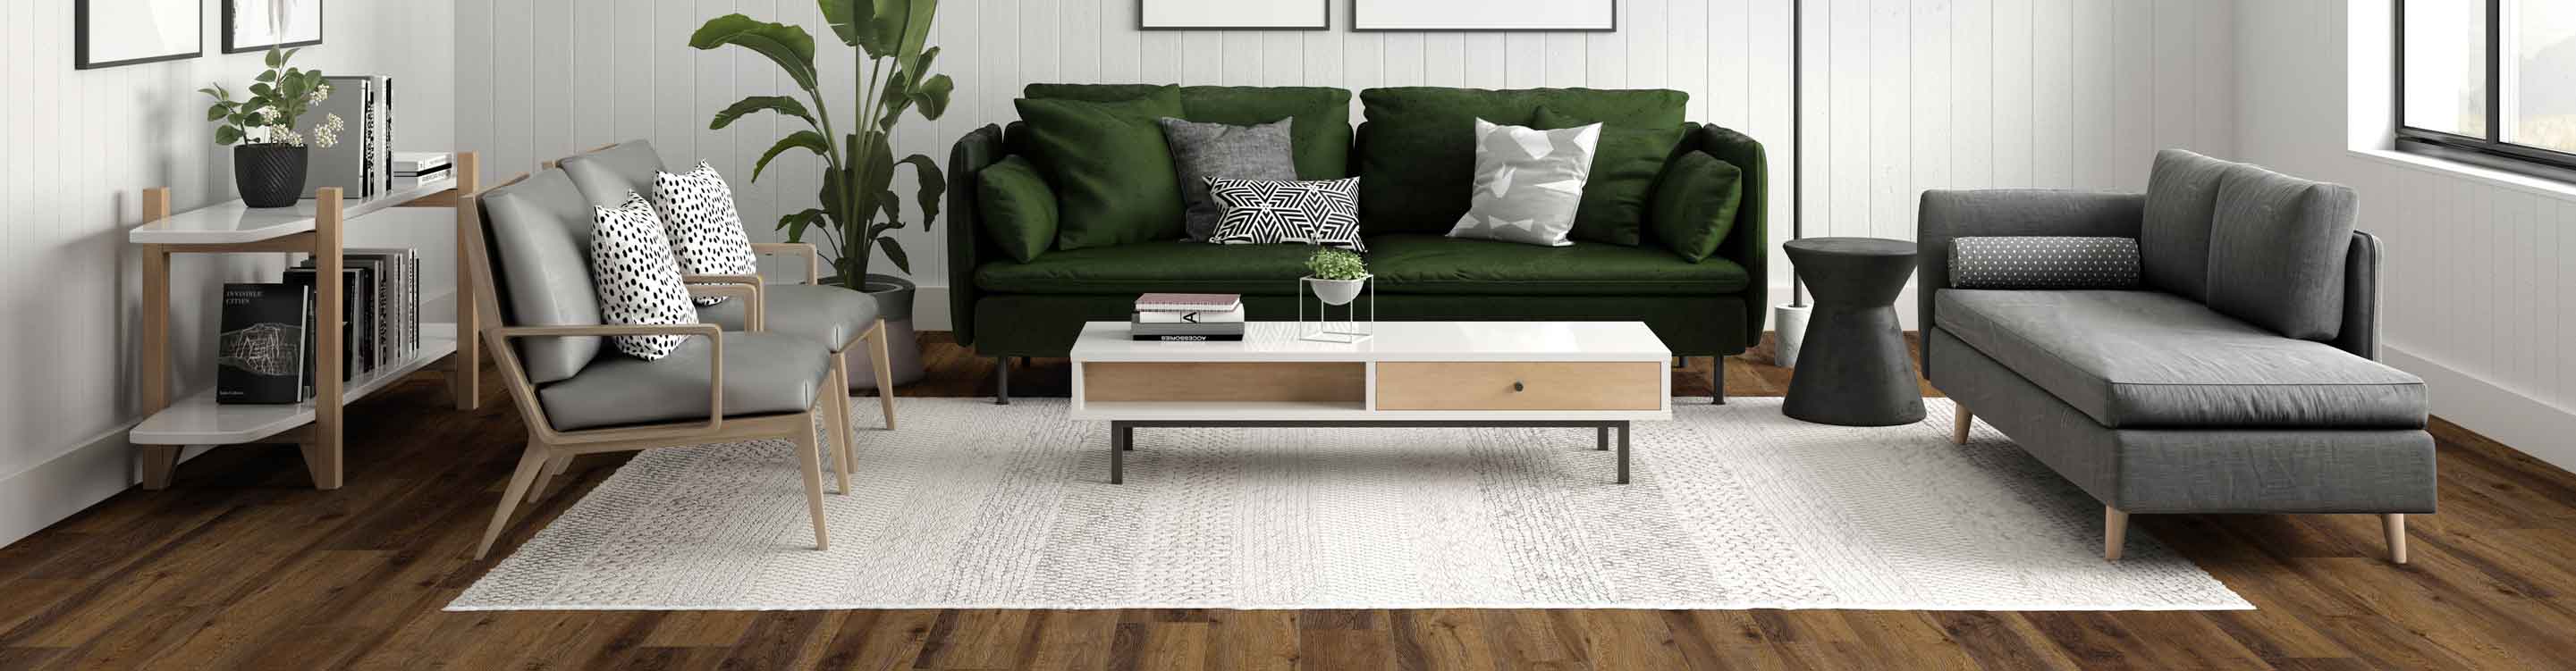 green and gray furniture in a living room with hardwood floor and a beige area rug